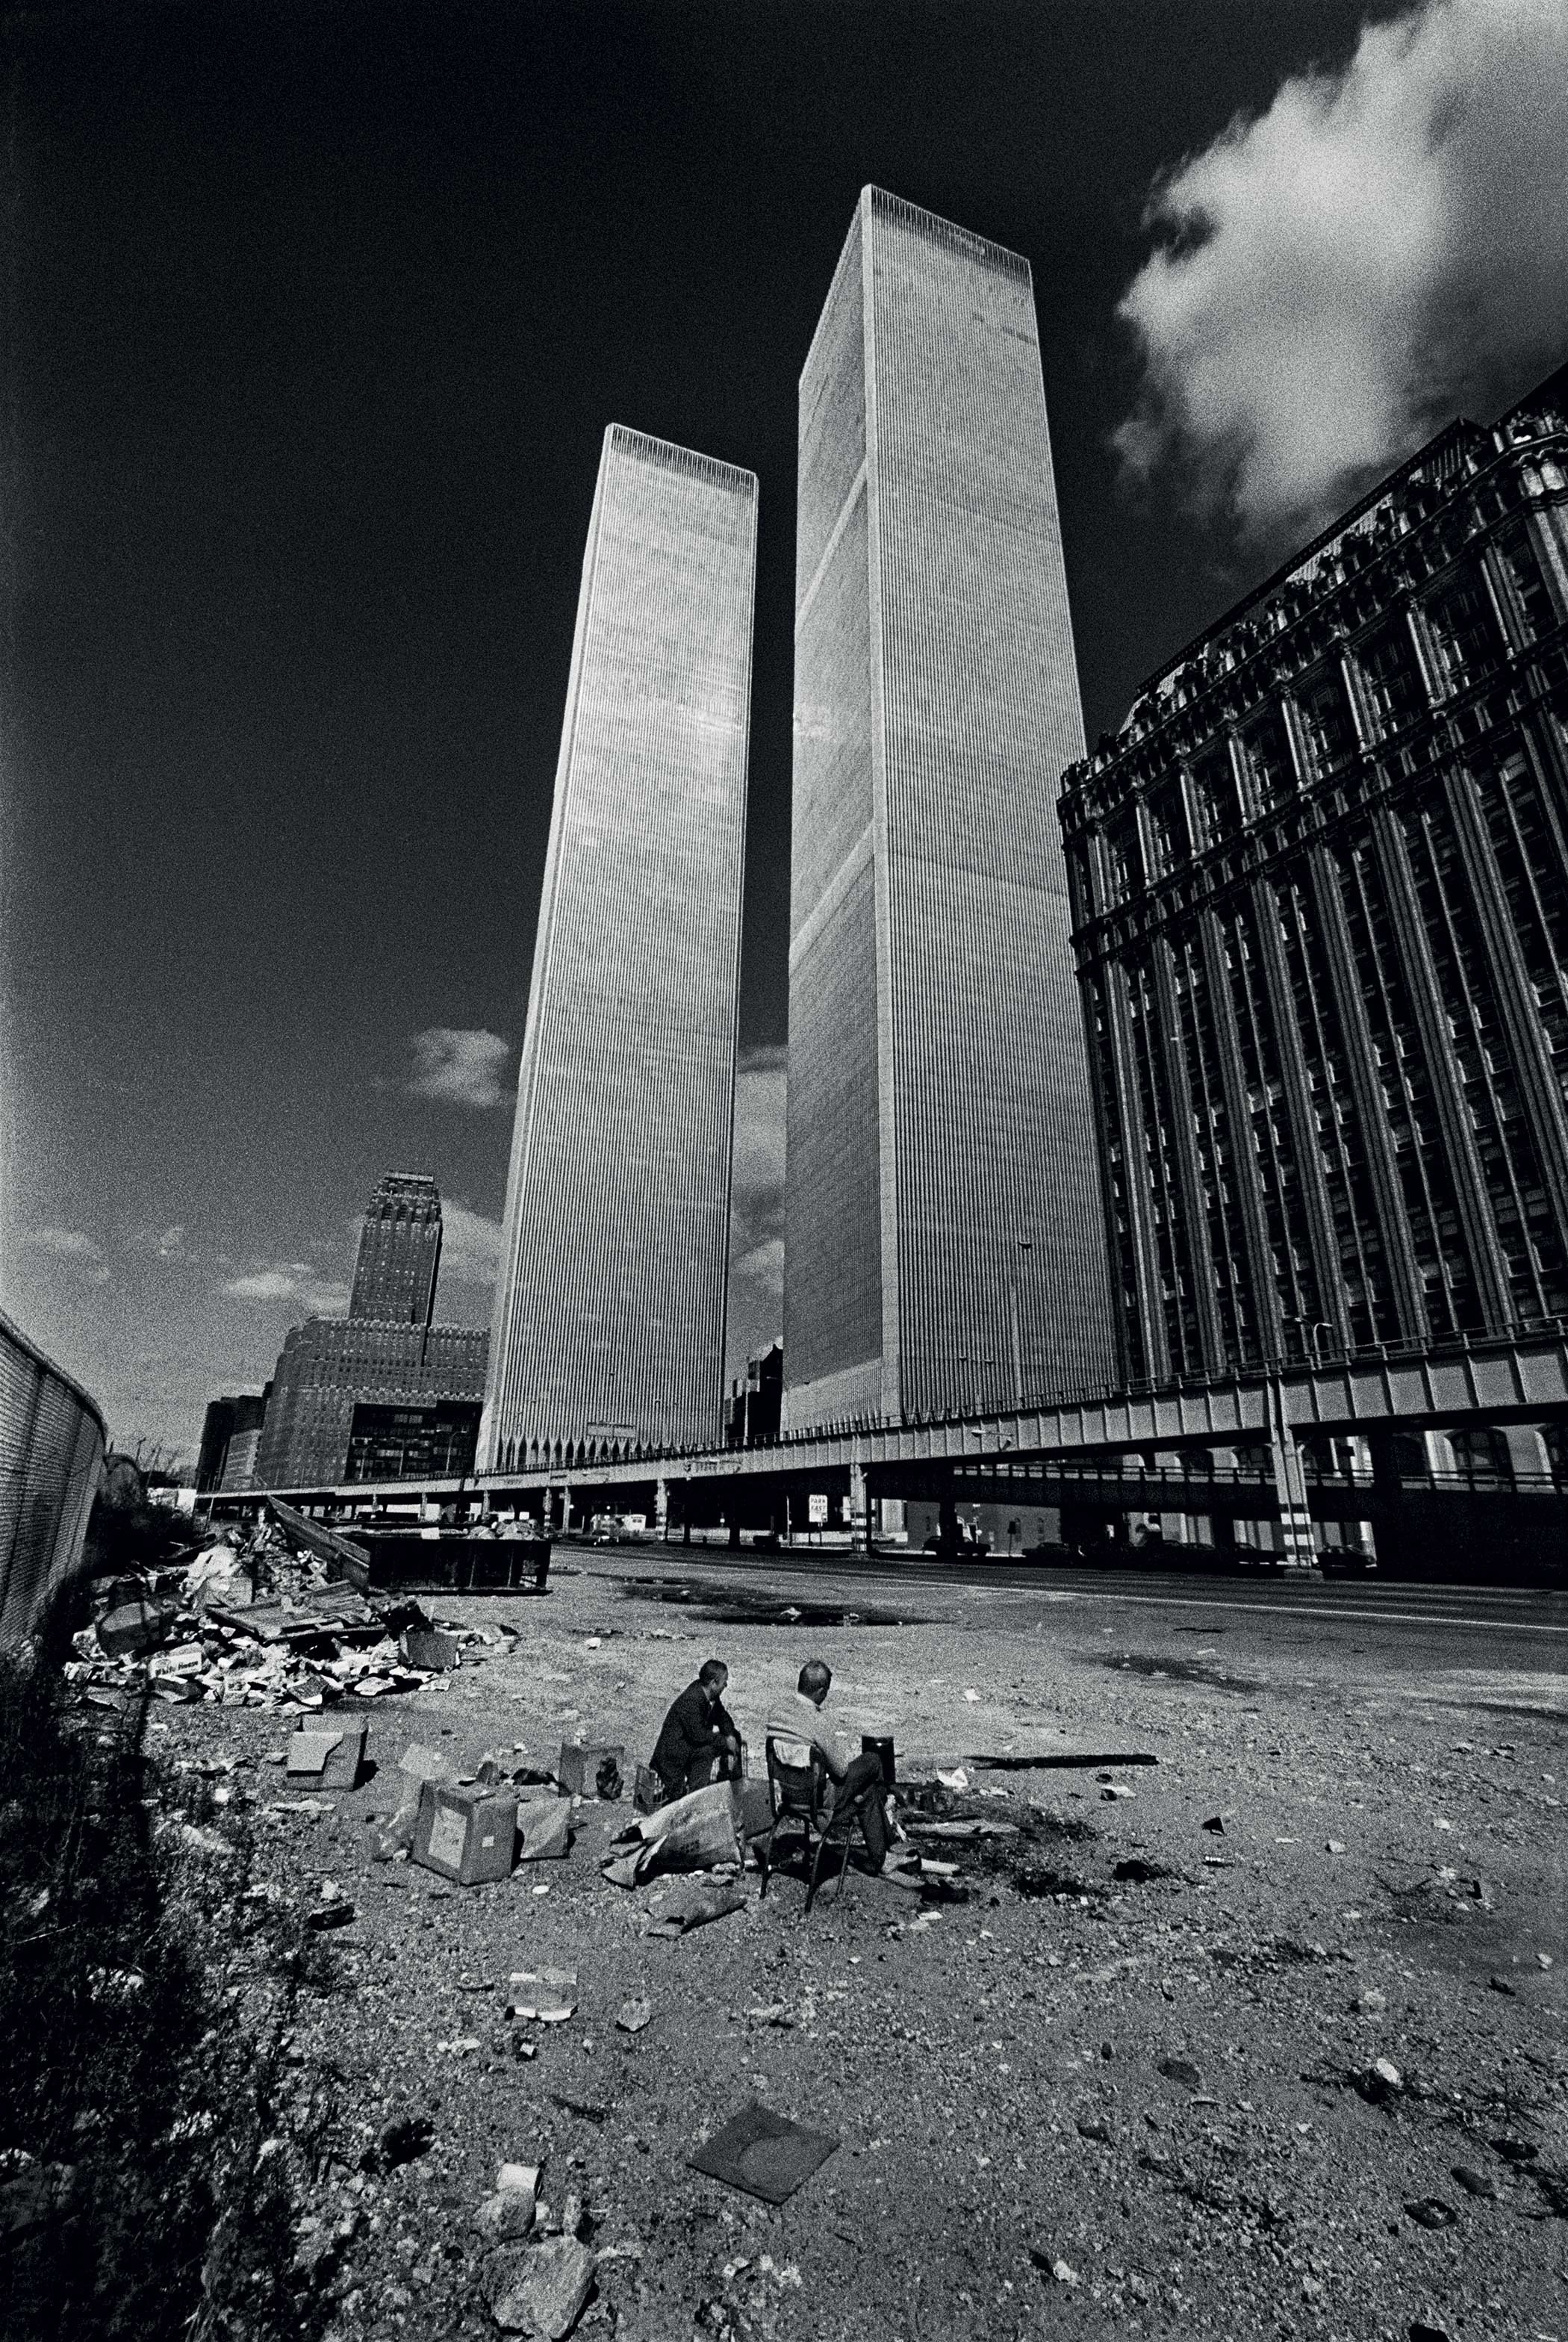 General 2100x3136 architecture building skyscraper city cityscape urban clouds New York City USA Twin Towers World Trade Center Never Forget men people dirt bridge monochrome portrait display old photos landmark North America